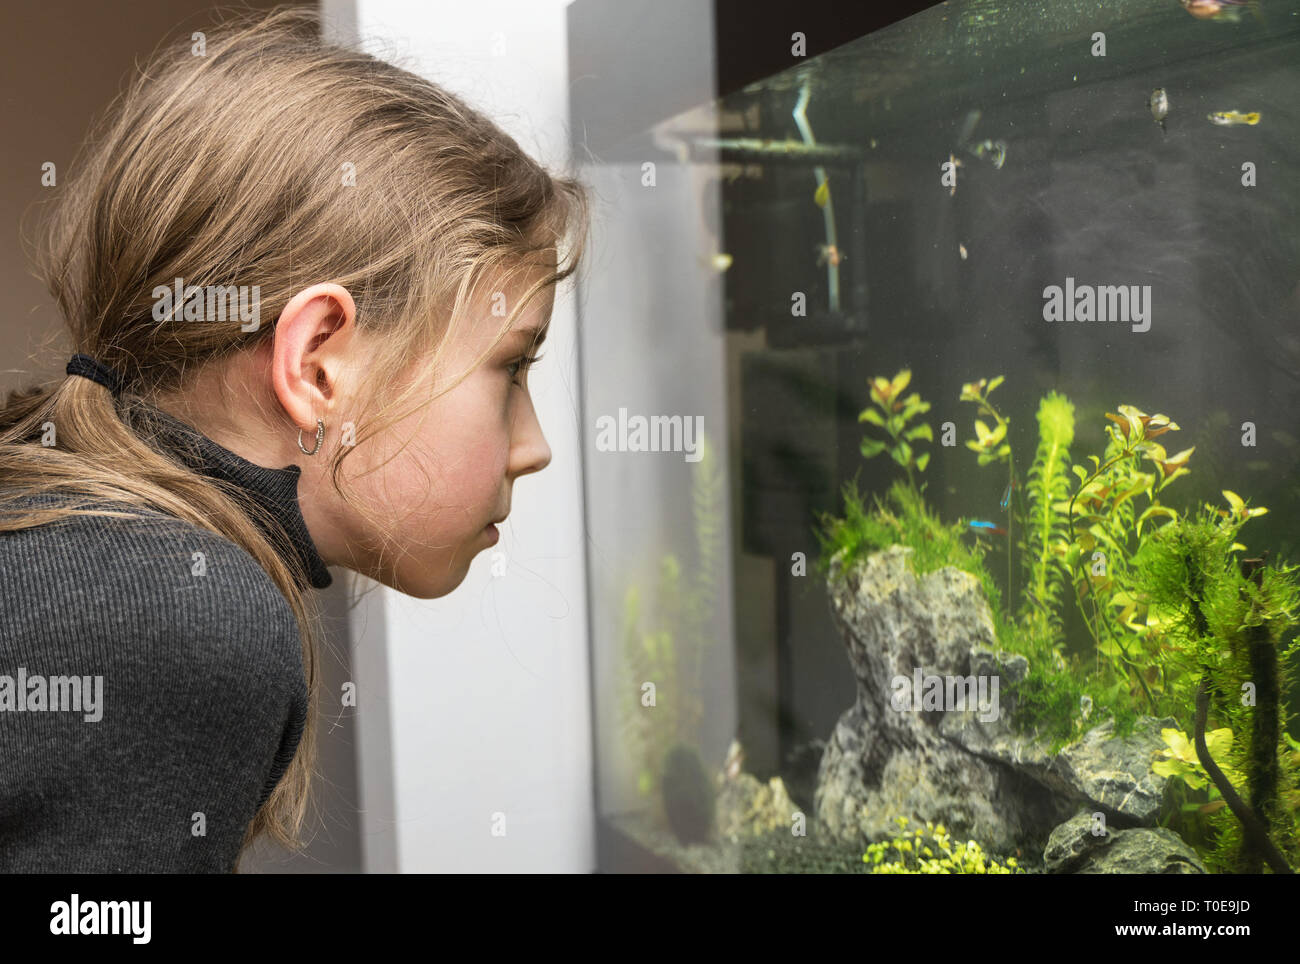 Little girl looks at the fish in the aquarium. Stock Photo